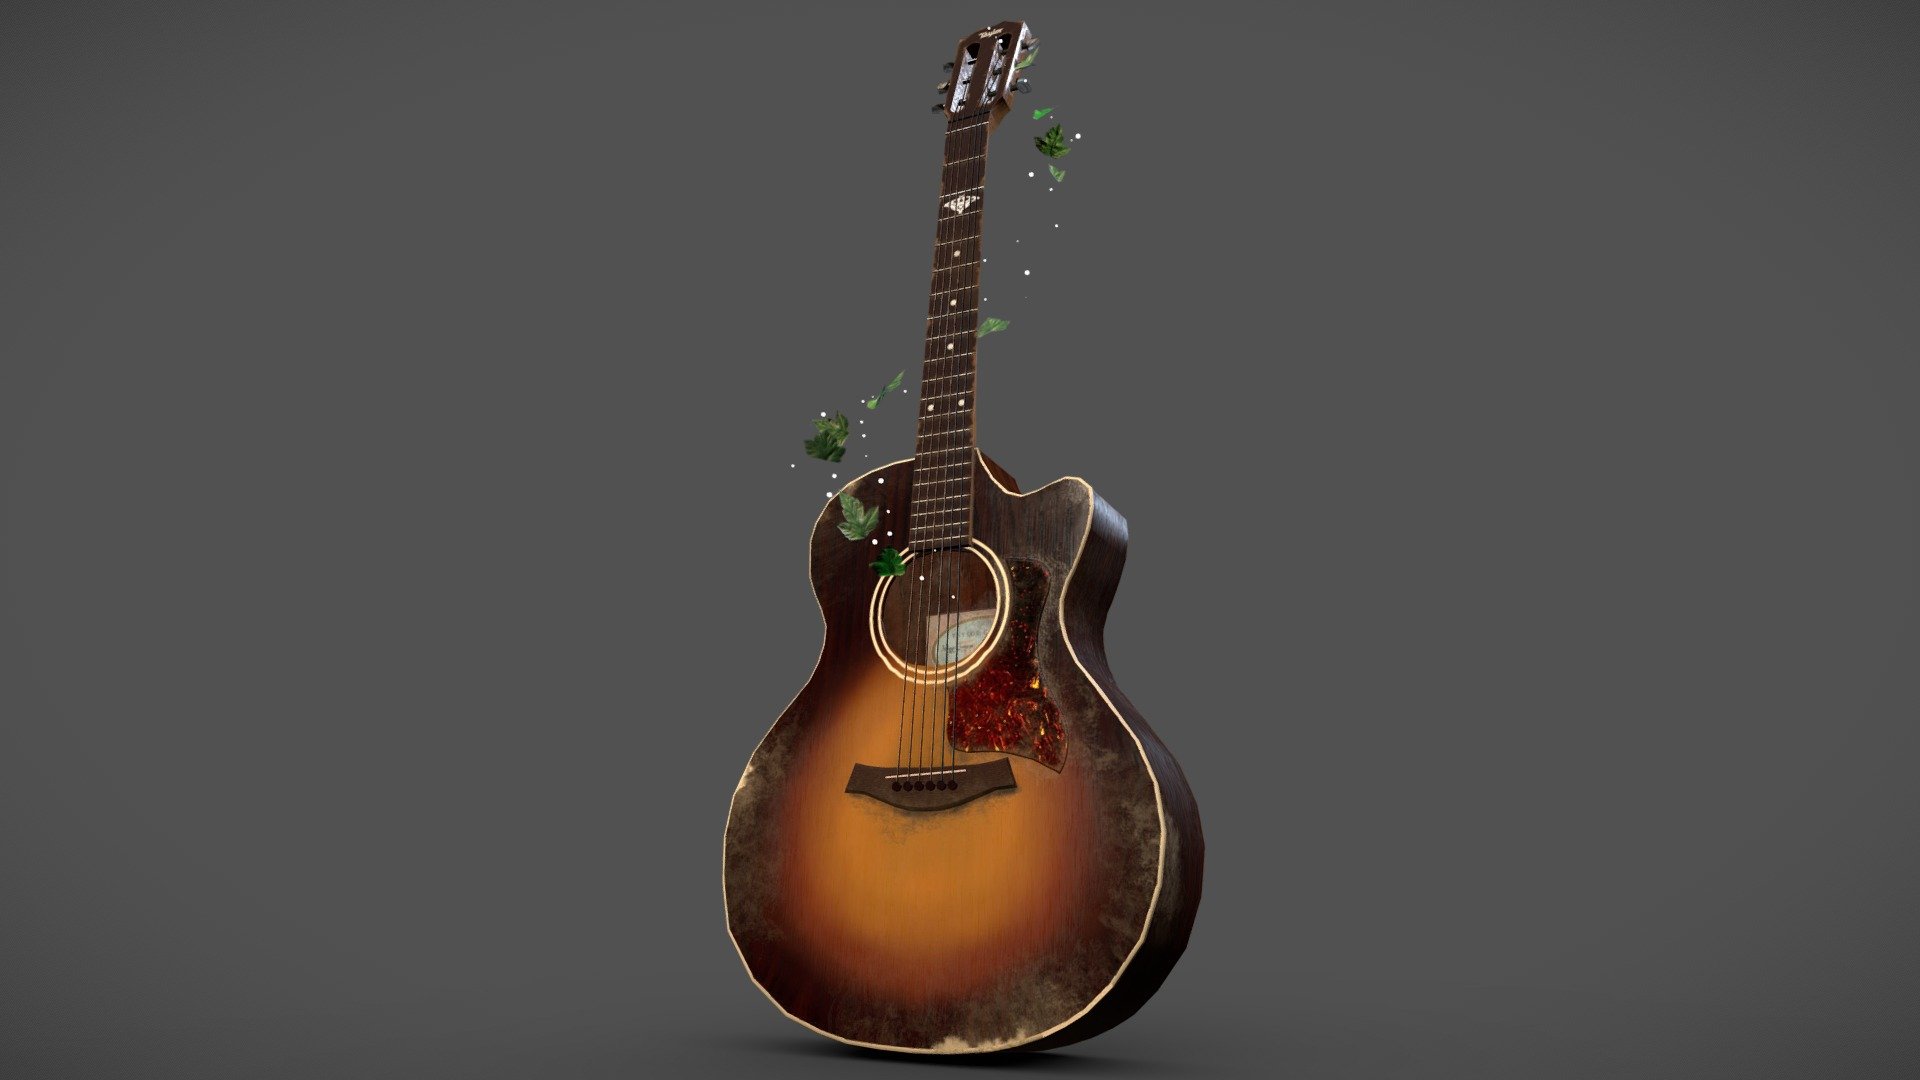 Made for a bigger project, this very special asset is one of those which I have loved to made it.
As the first 3d model made during my first steps as a streamer in Kick (https://kick.com/quimaera) I am so happy with the result.

Stay tunned for the next scene, where this guitar will be the main character&hellip;

Completely made in 3DsMax and Substance Painter &amp; Photoshop 3d model